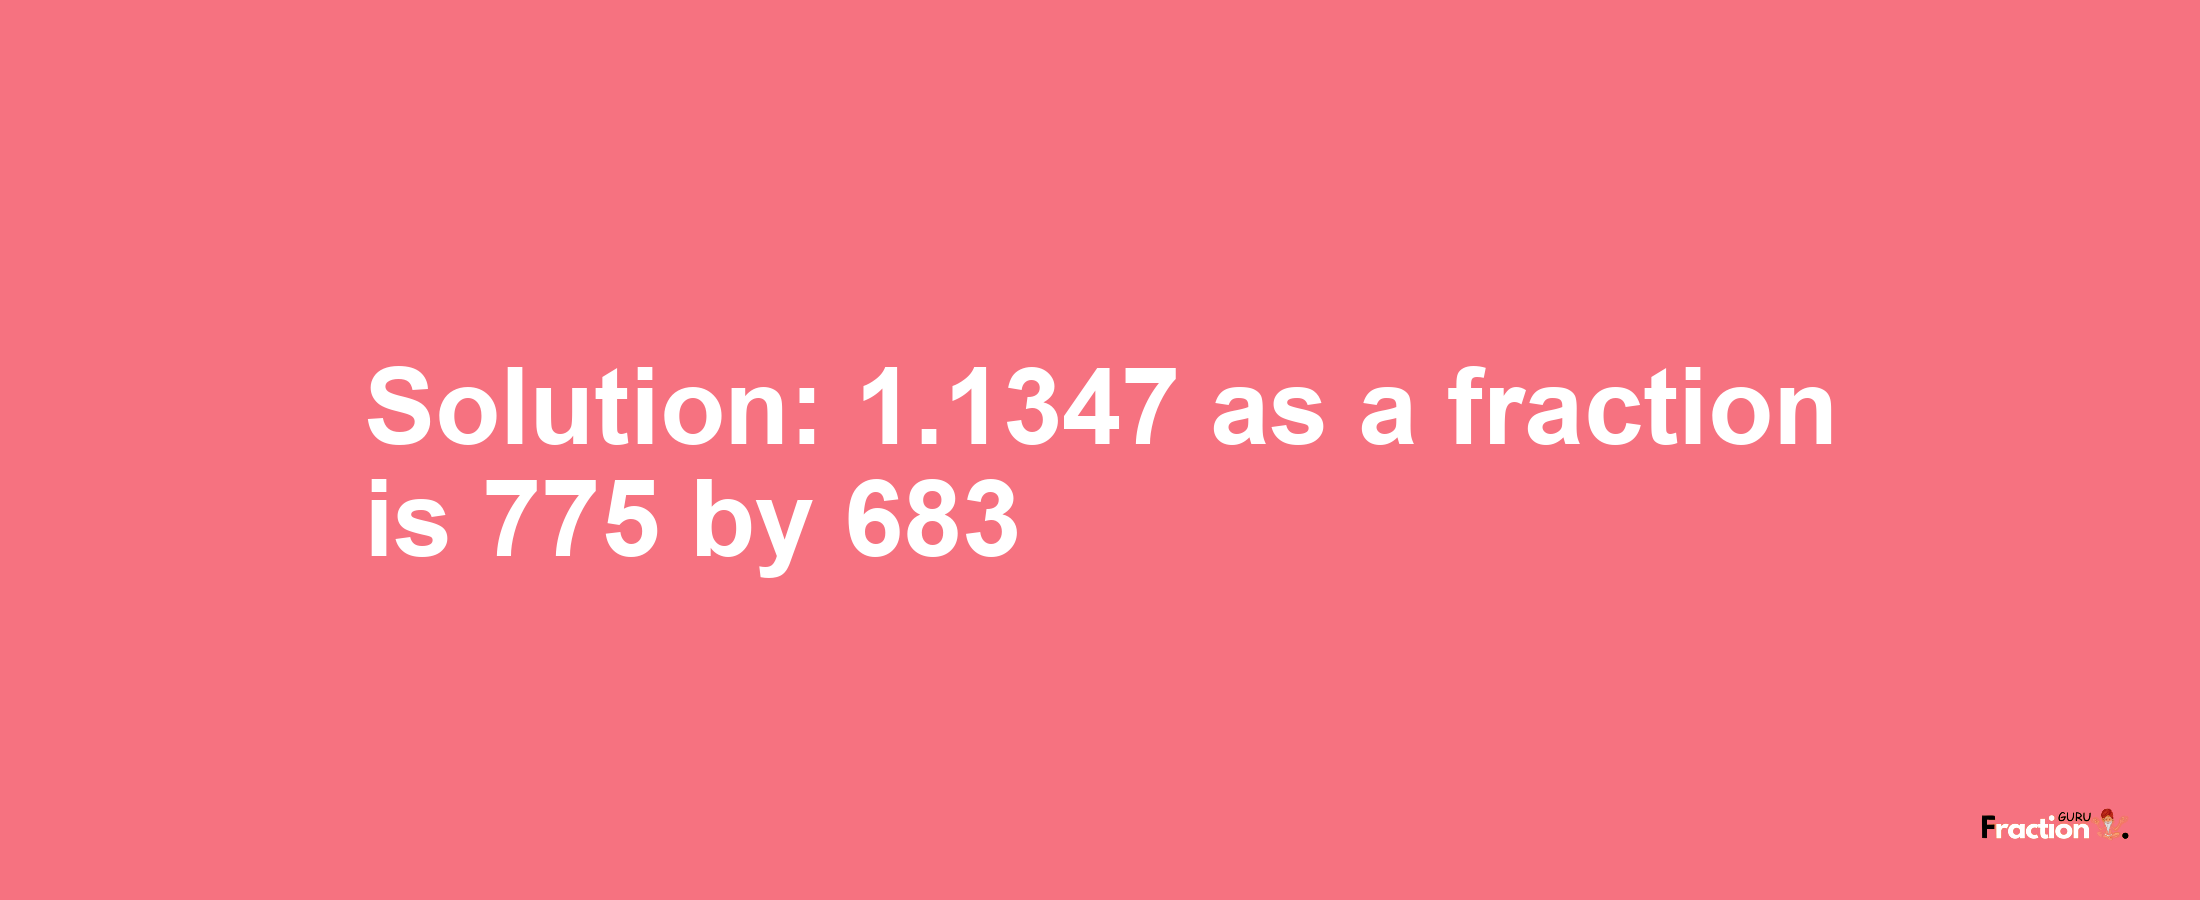 Solution:1.1347 as a fraction is 775/683